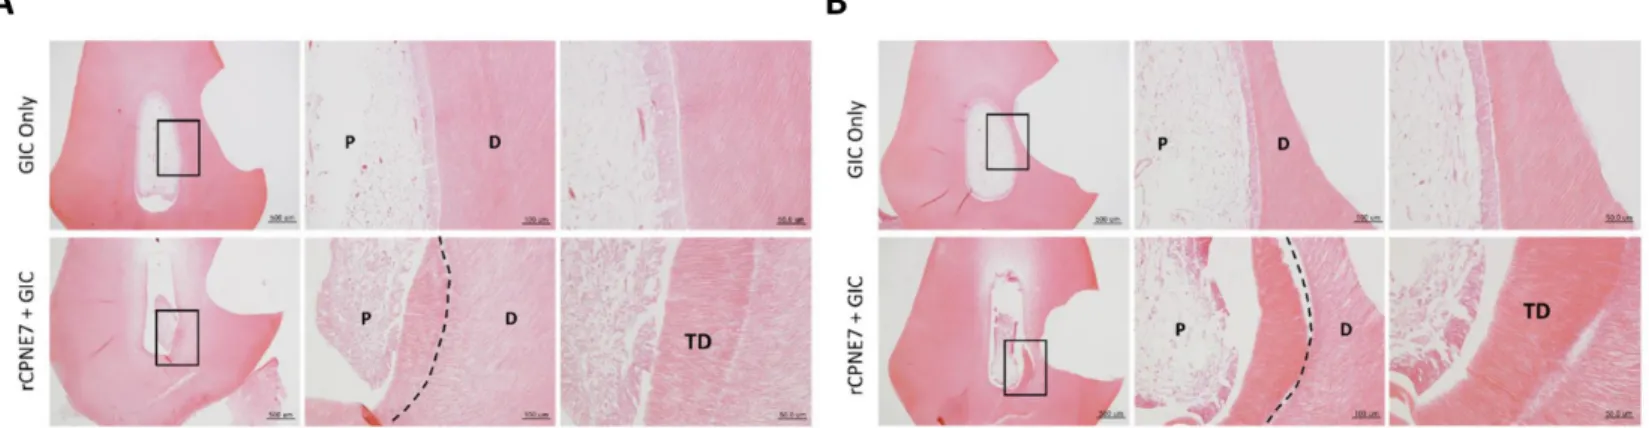 Figure  4.  Histological  analysis  six  weeks  after  the  in  vivo treatment  of  rCPNE7.